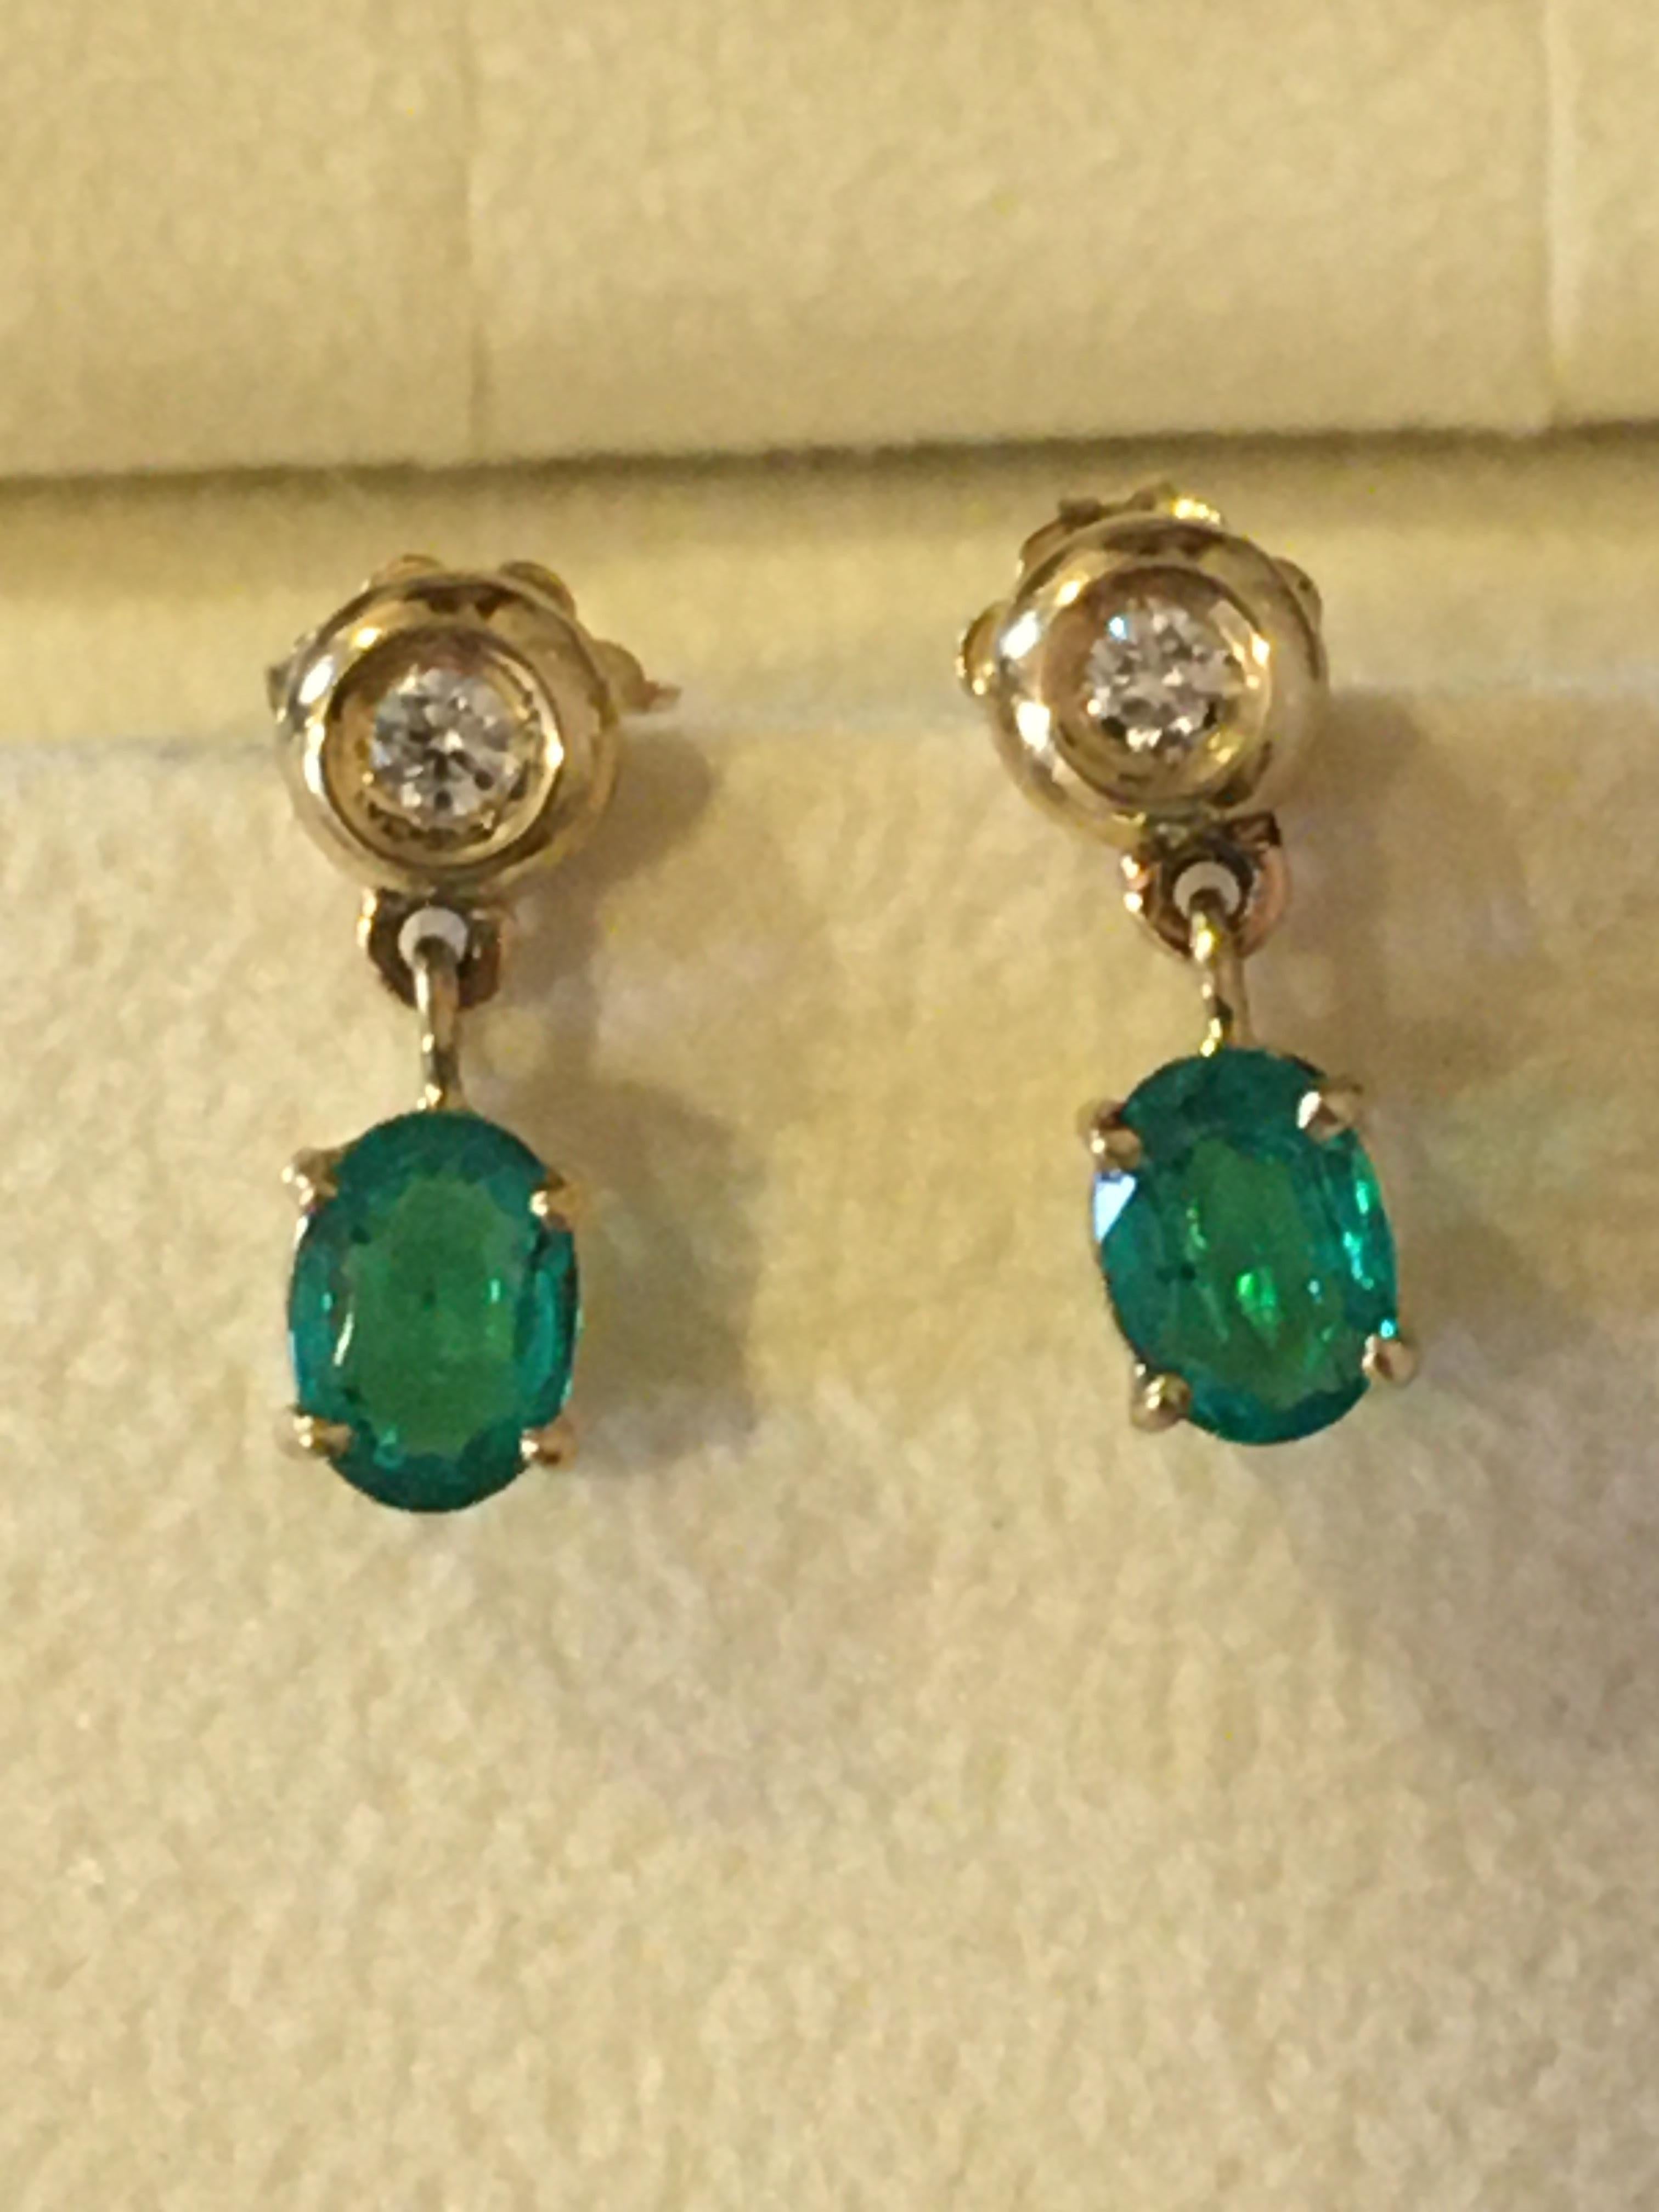 Magnificent Colombia vivid emeralds oval cut ct 2,15 ,excellent quality for color and clarity, and two diamonds 💎 ct 0,16 F/VVS, on 18k gold earrings. Extremely fine and luxury Jewels. Handmade with love. 
Handcrafted by artisan goldsmith.
Made in